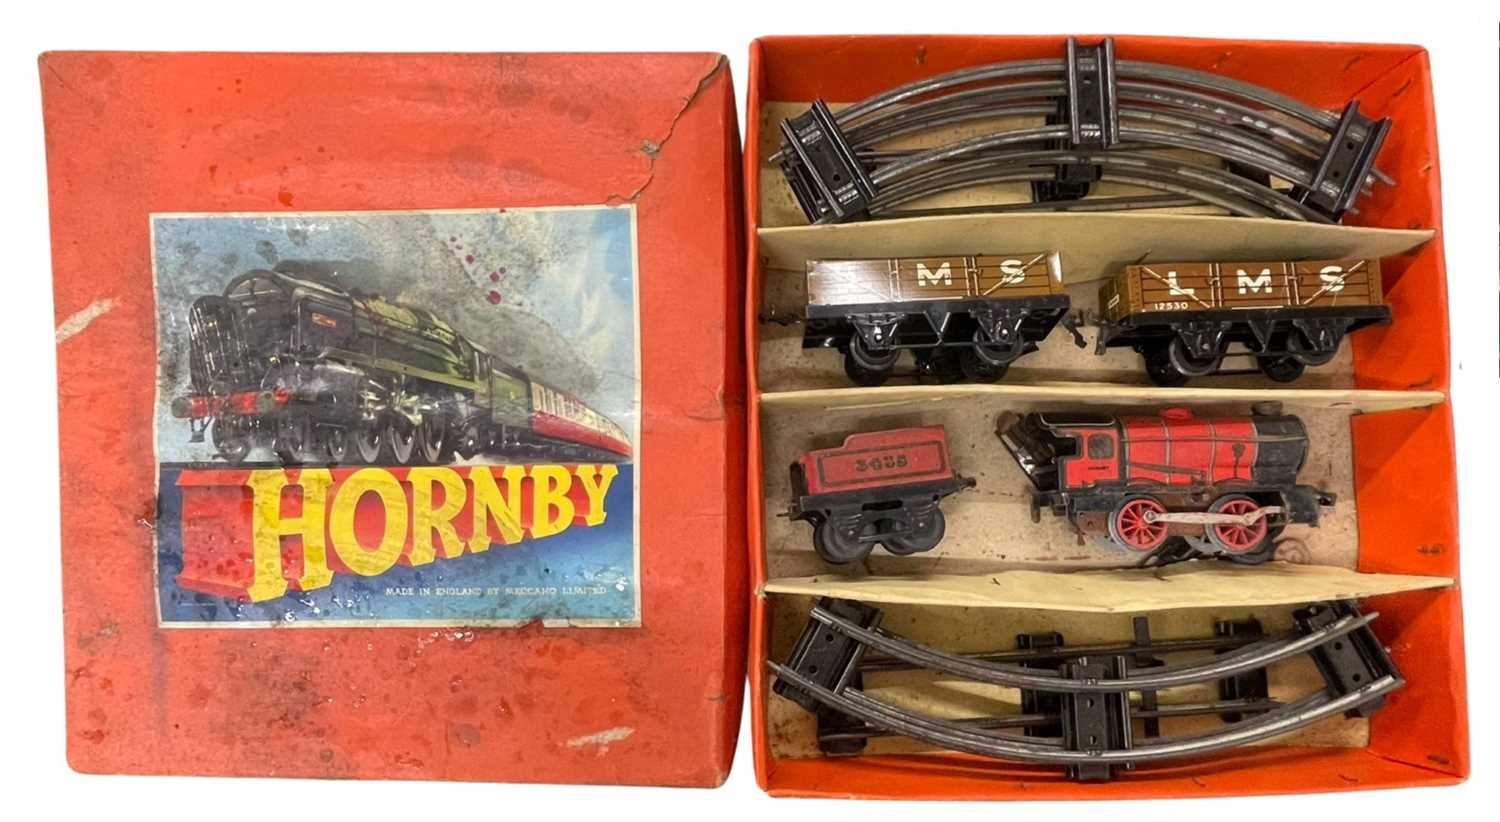 A boxed 0 gauge Hornby M1 Goods set (unchecked for completeness)